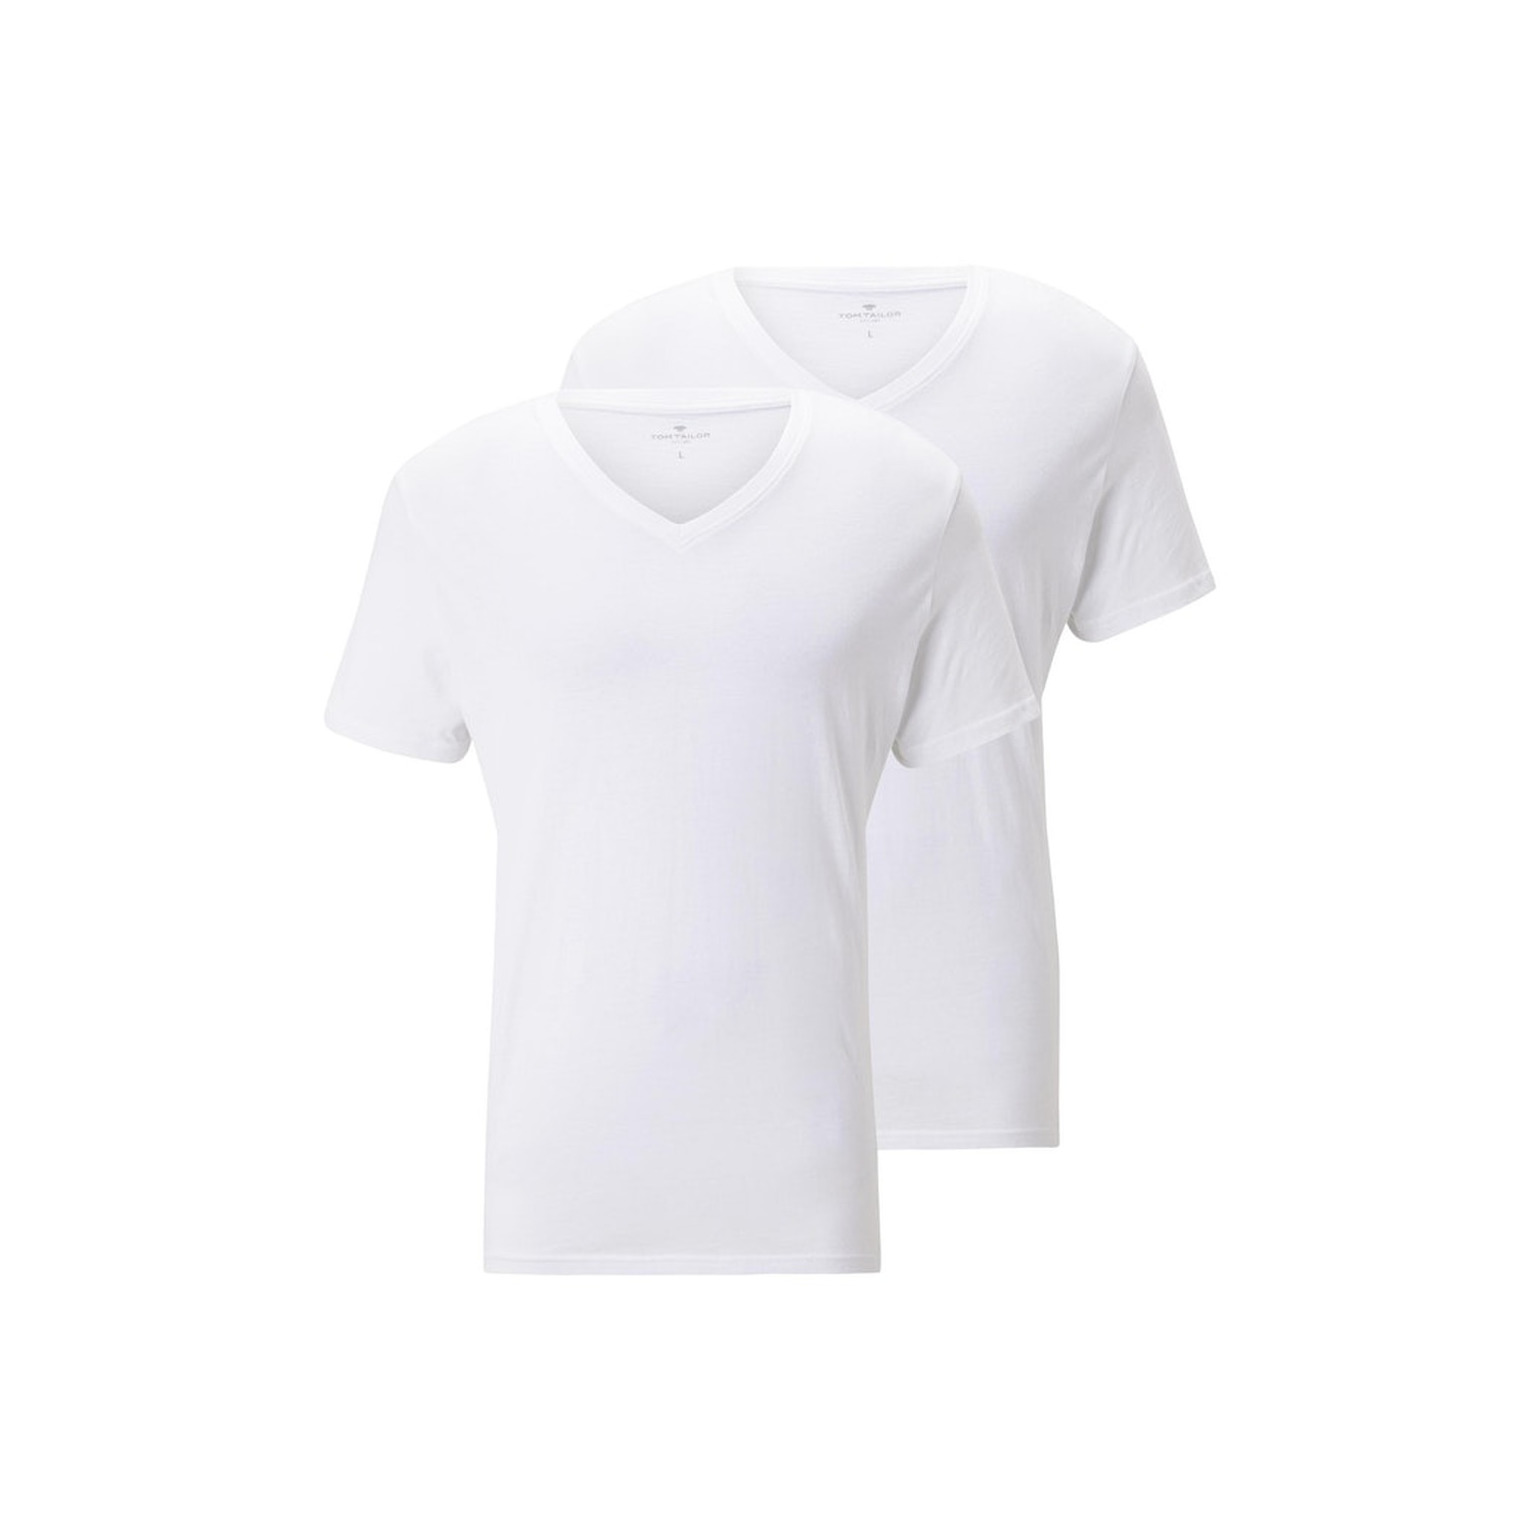 tee double TAILOR Mücke pack neck Shirts | TOM Schuh v-